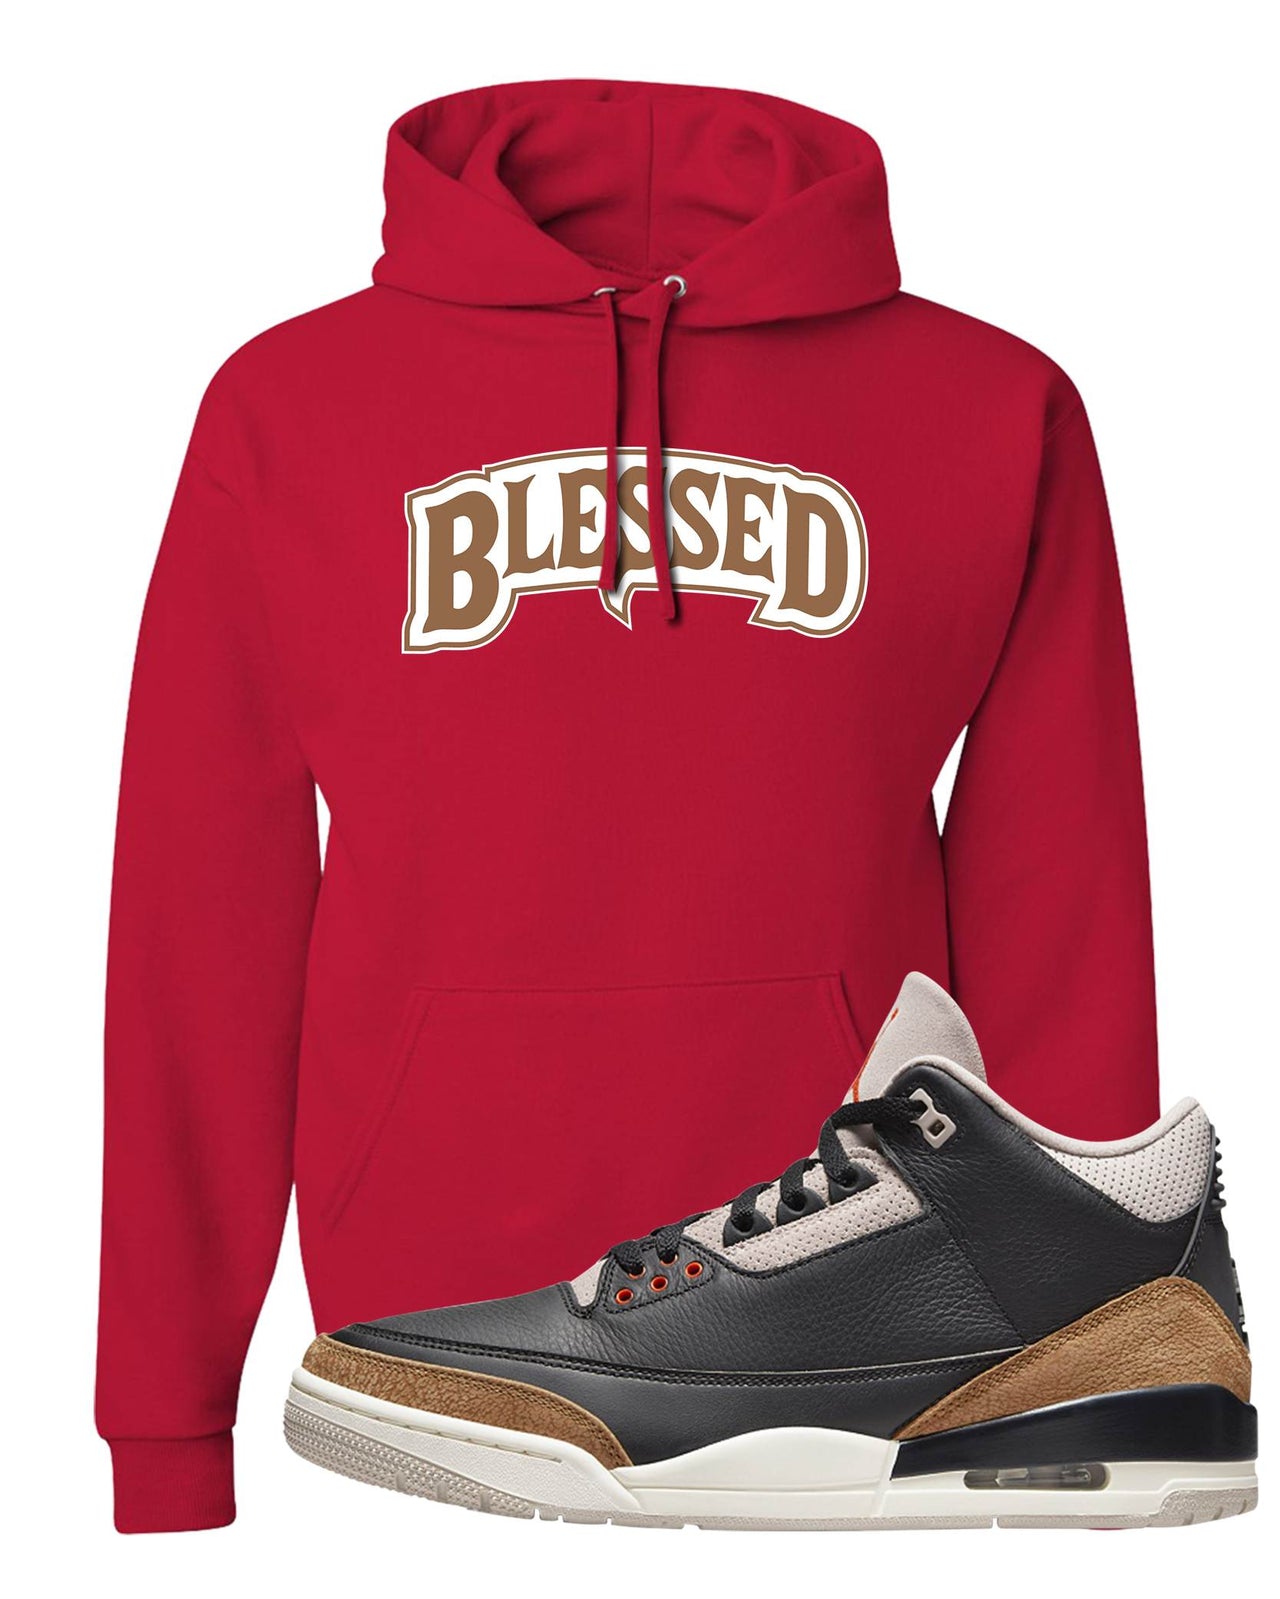 Desert Elephant 3s Hoodie | Blessed Arch, Red